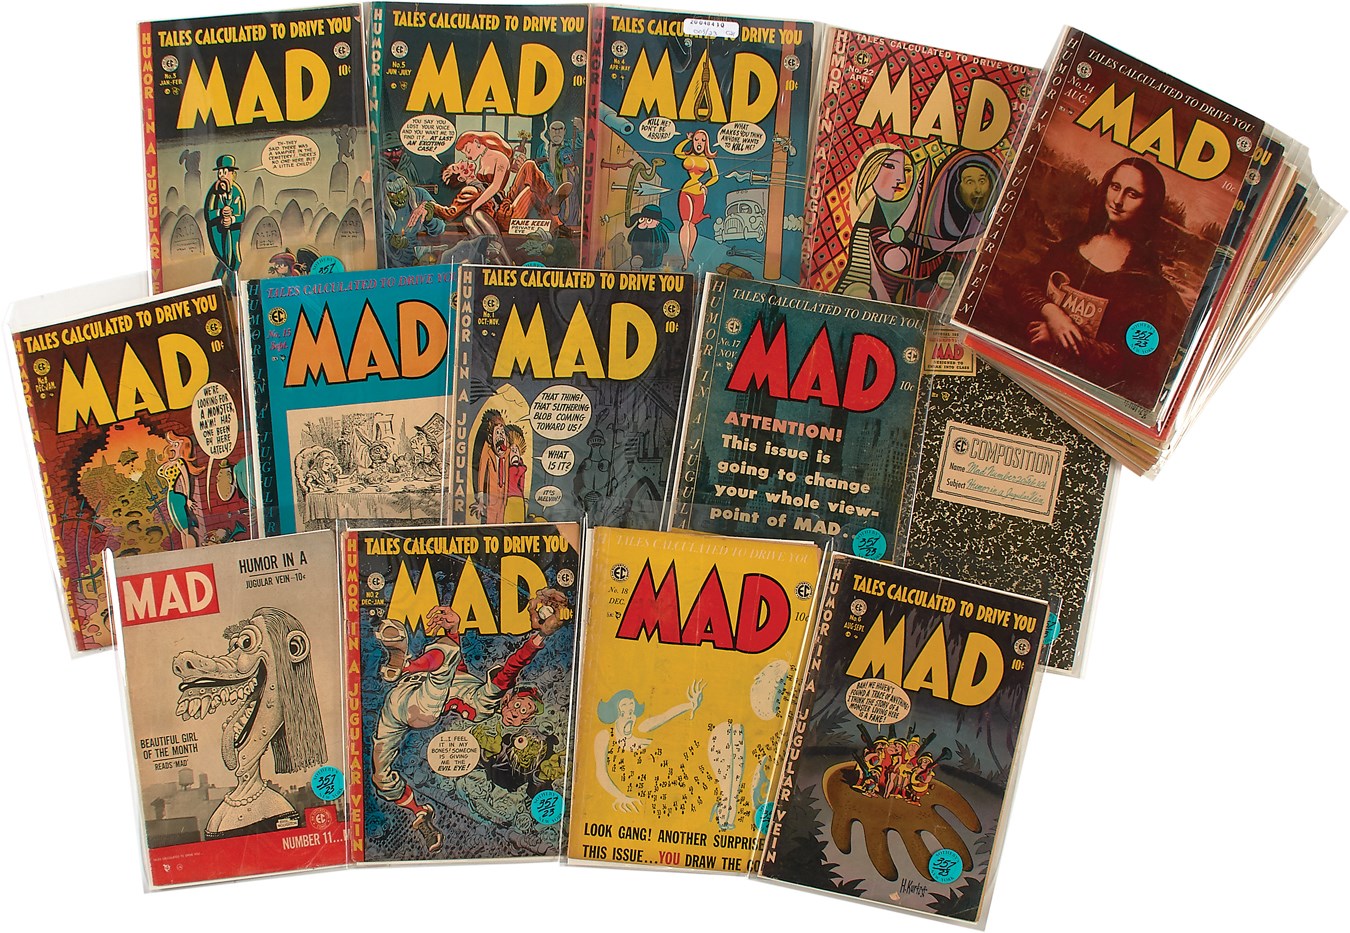 Pop Culture Autographs - MAD Magazine Complete Run of the Comic Books (#1-23) - from 1994 Sotheby's Auction